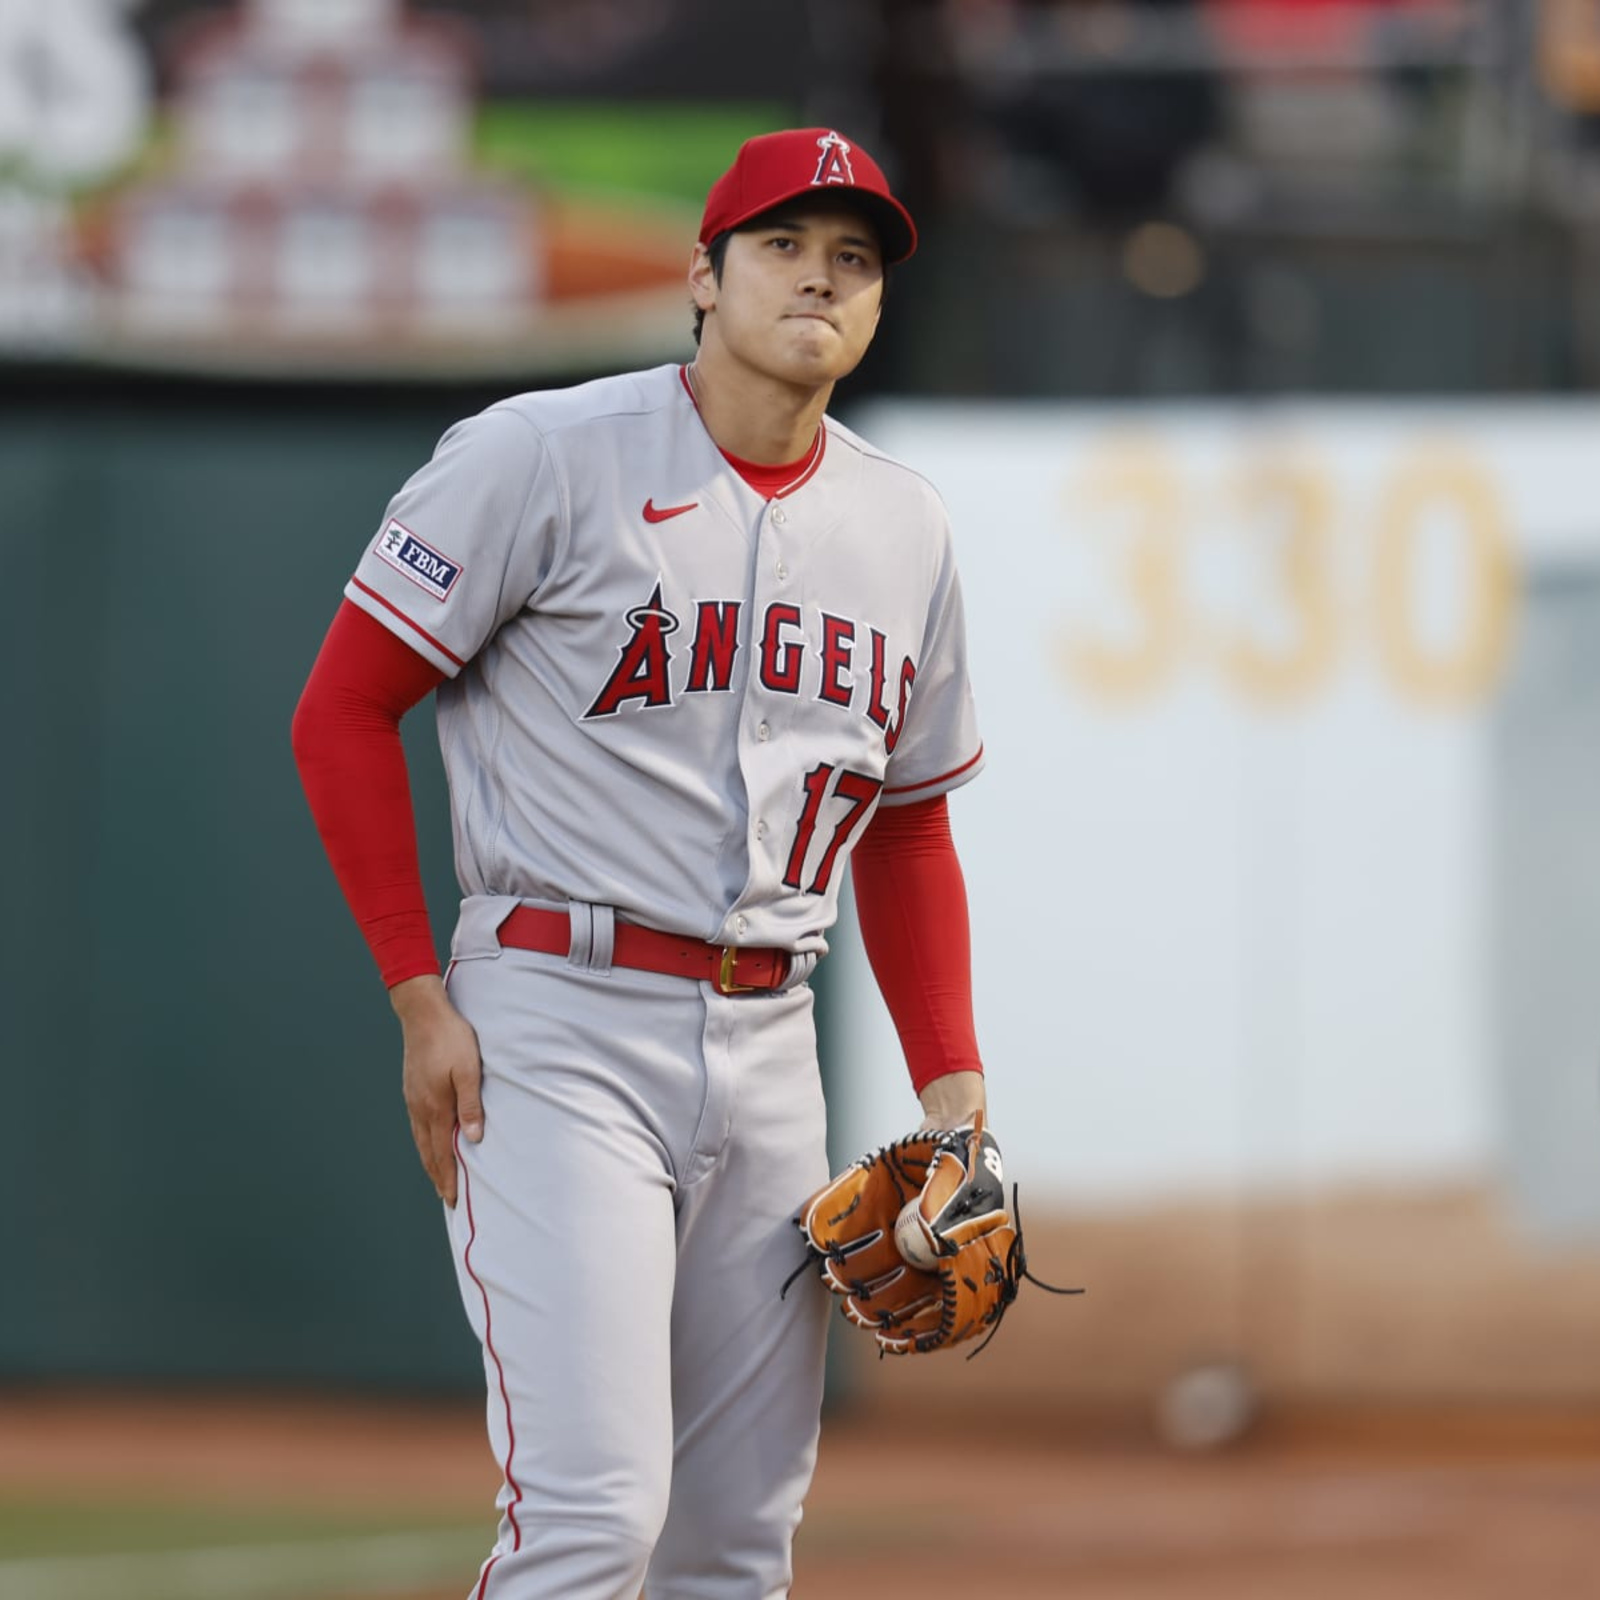 Shohei Ohtani adds his name to the record book by becoming the 4th